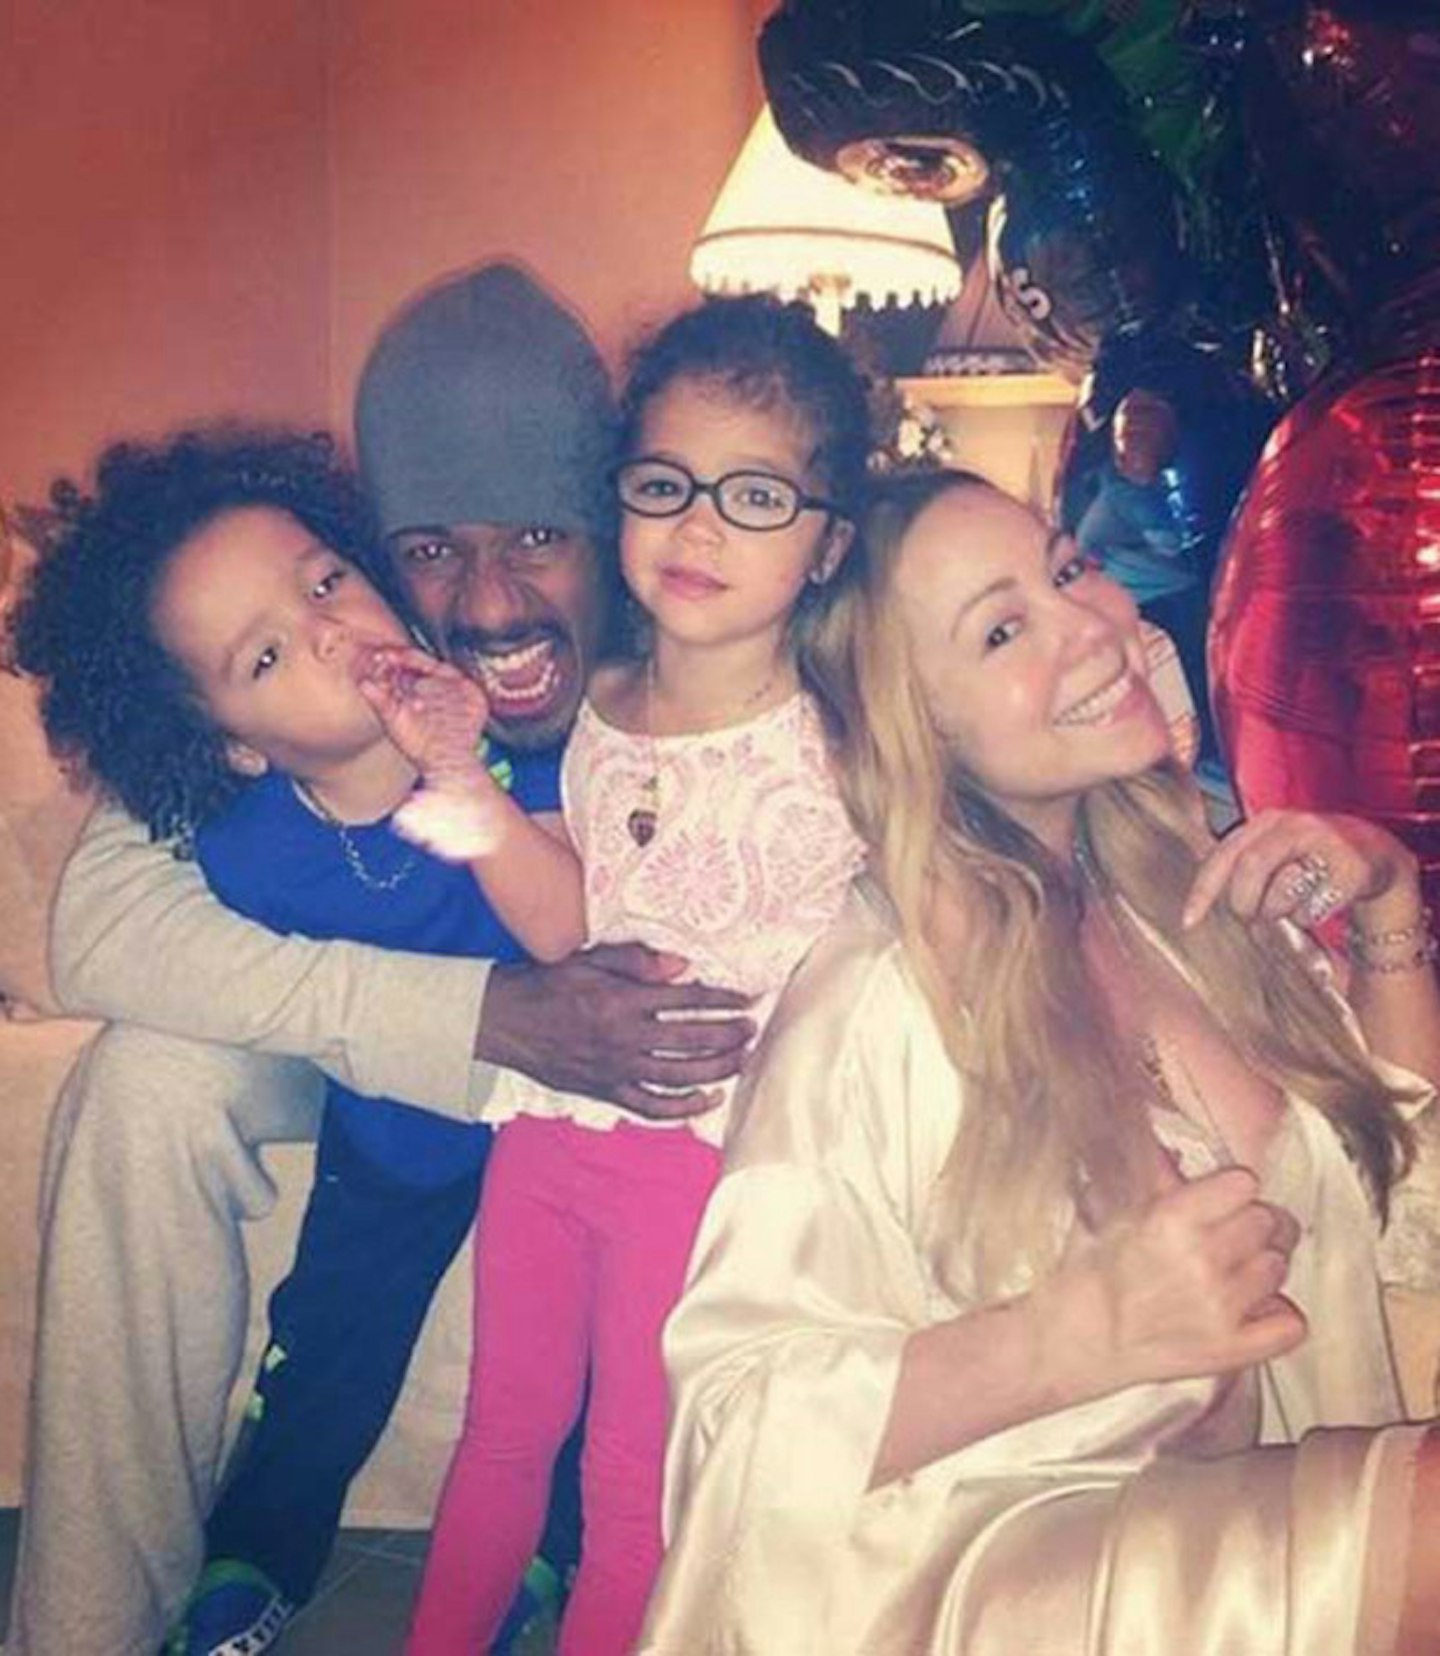 Mariah Carey, Nick Cannon and their kids